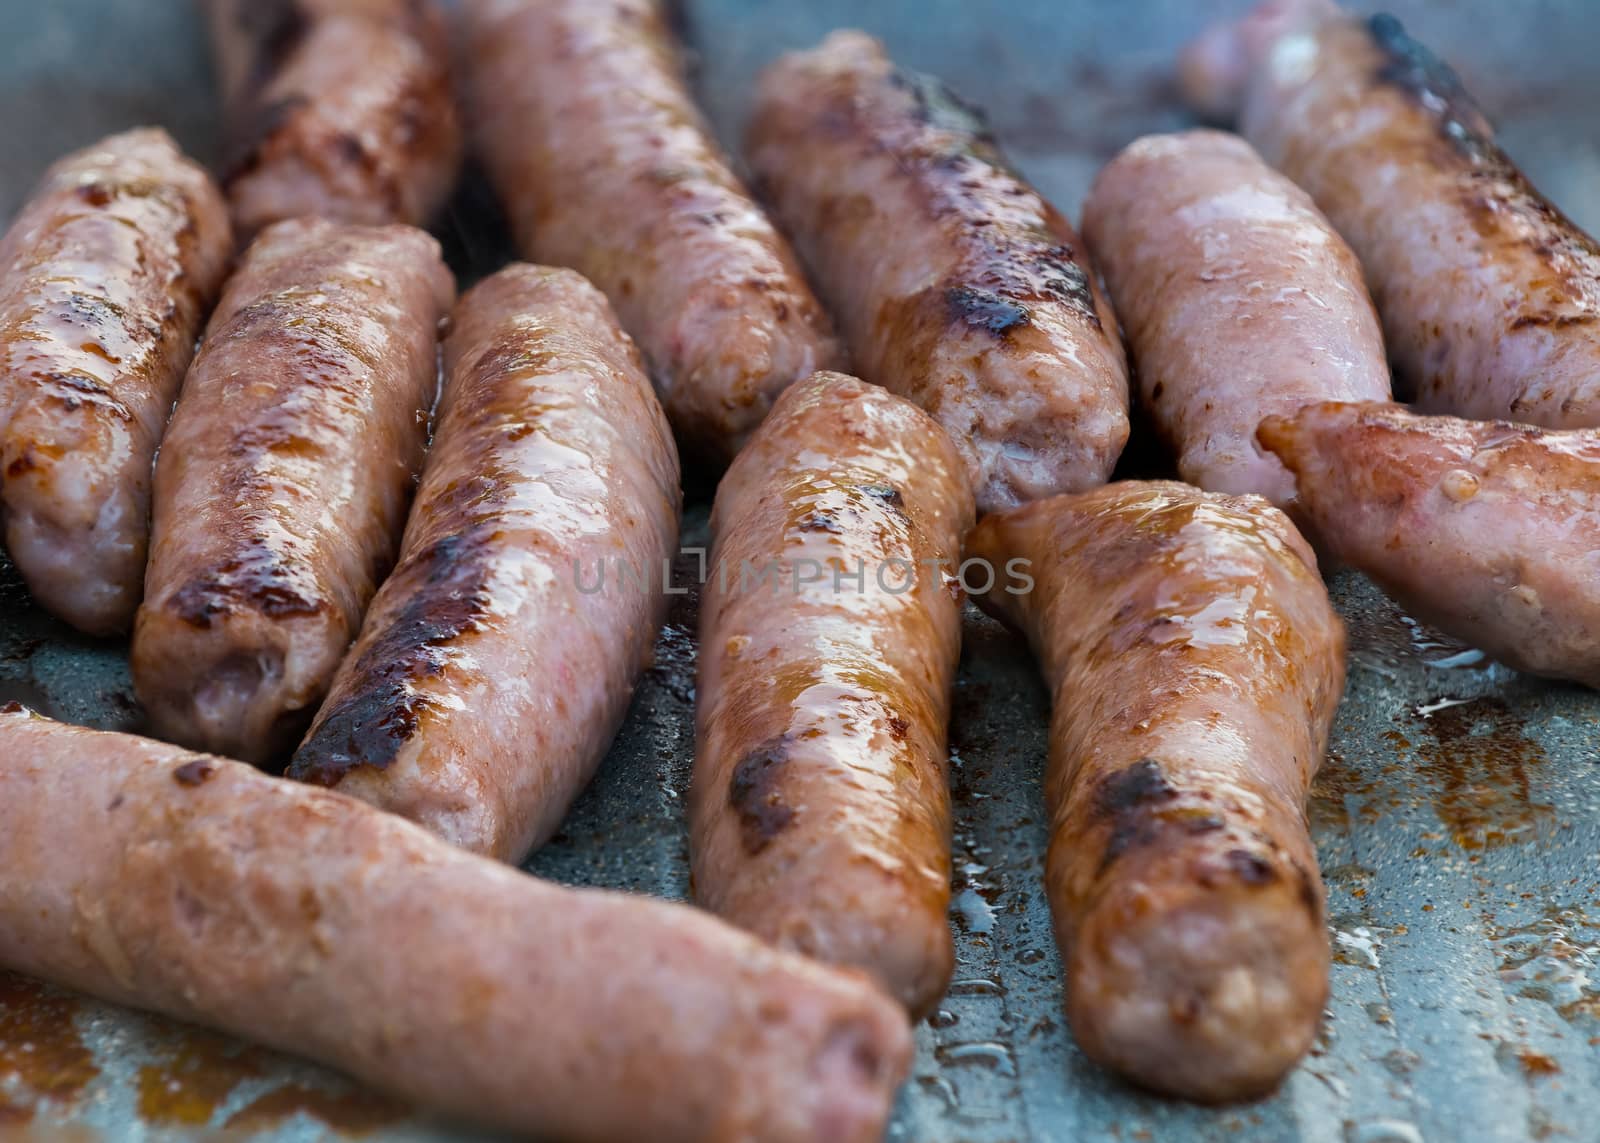 Cooking sausages close-up by Robertobinetti70